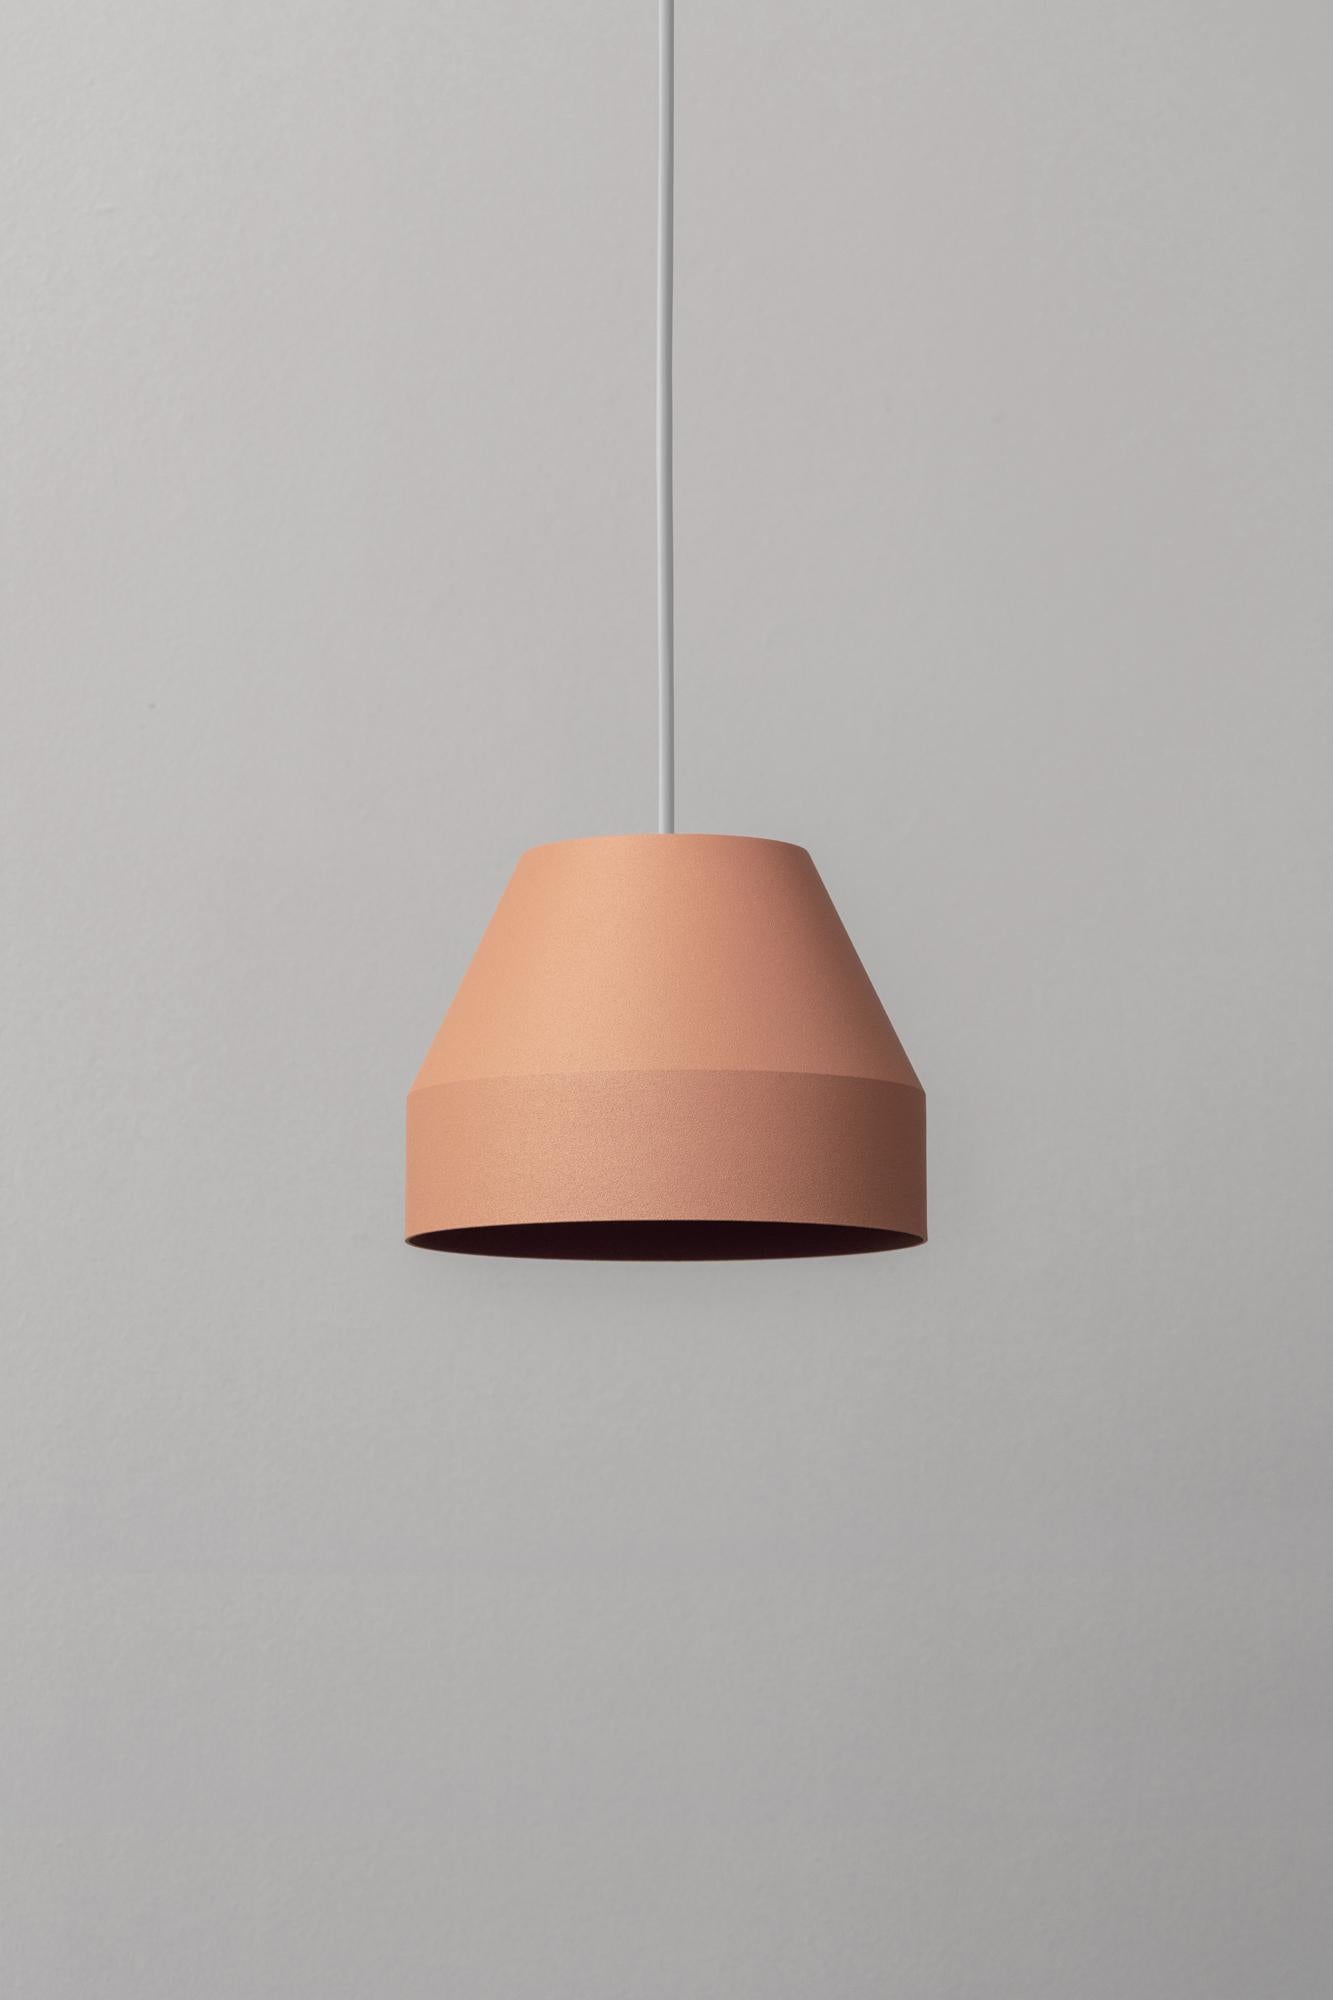 Small Coral Cap Pendant Lamp by +kouple
Dimensions: Ø 16 x H 12 cm. 
Materials: Powder-coated steel.

Available in different color options. The rod length is 200 cm. Please contact us.

All our lamps can be wired according to each country. If sold